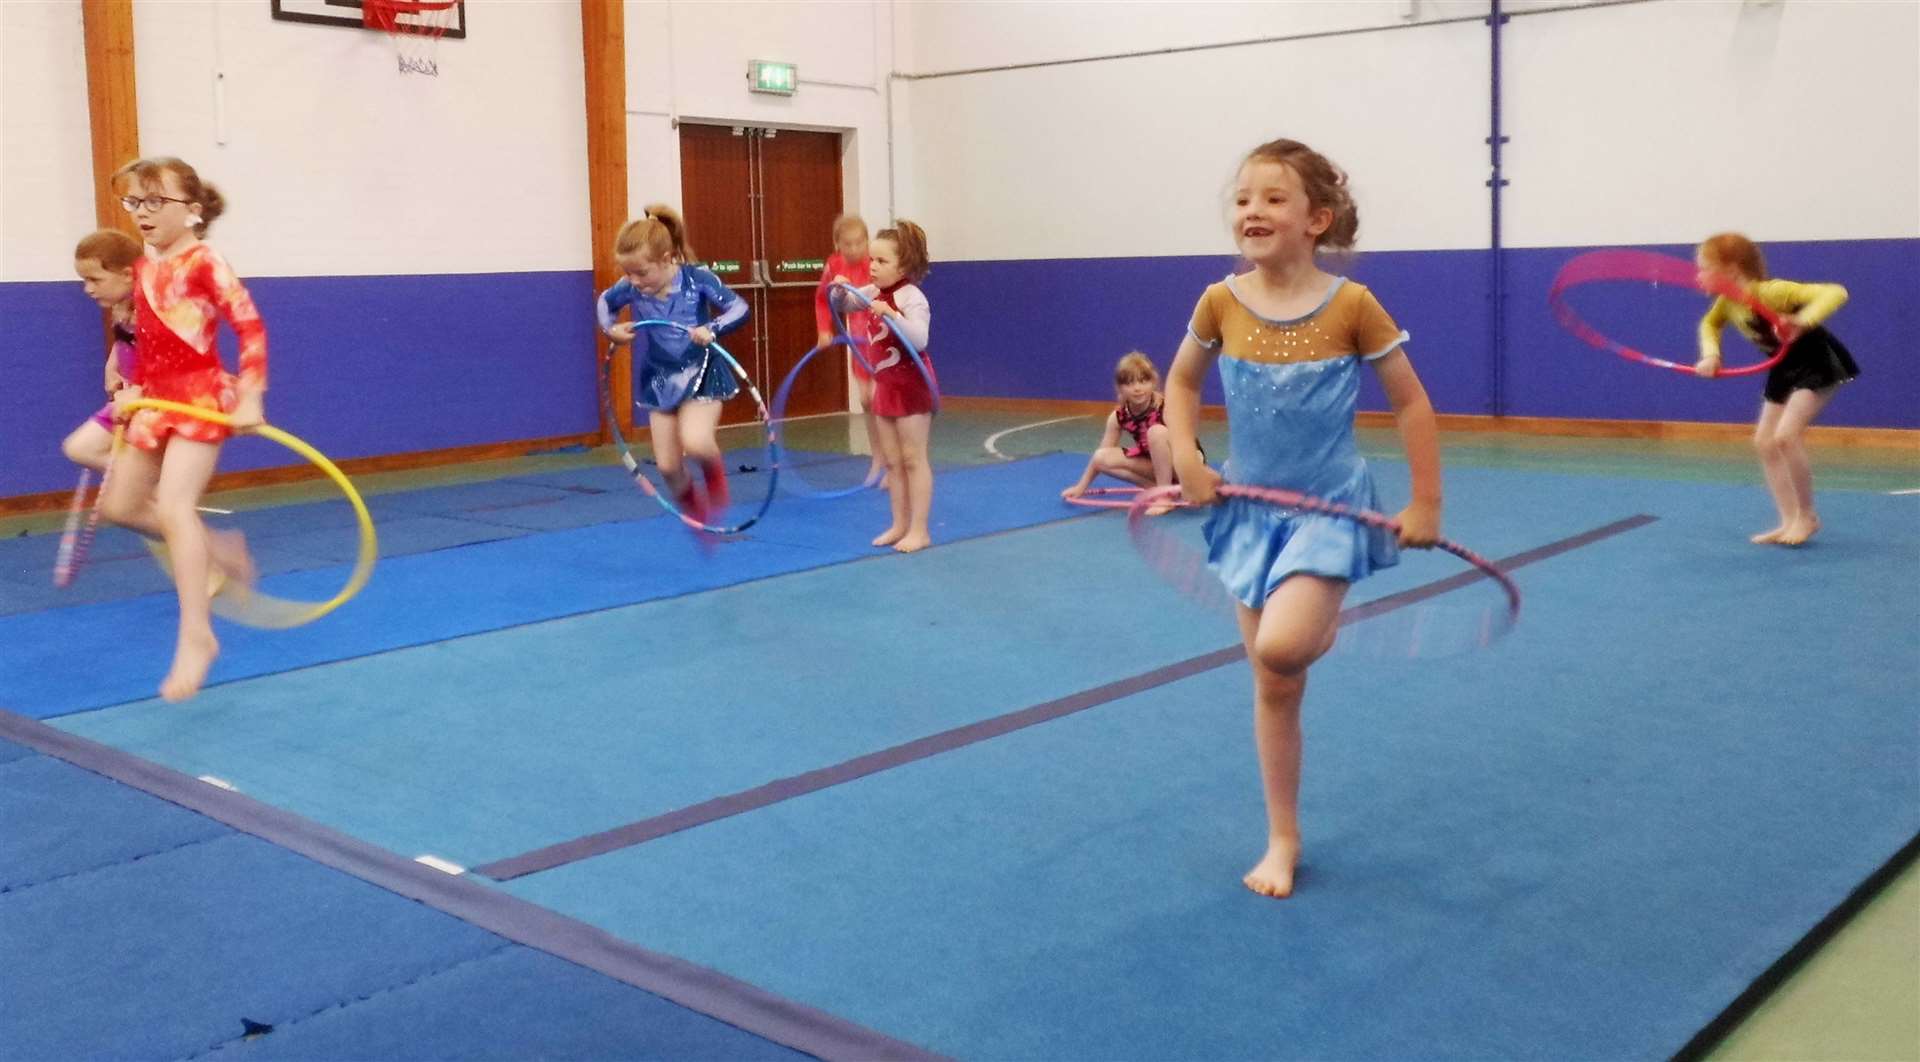 Members of Caithness Rhythmic Gymnastics put on an exciting programme of fast-moving routines.